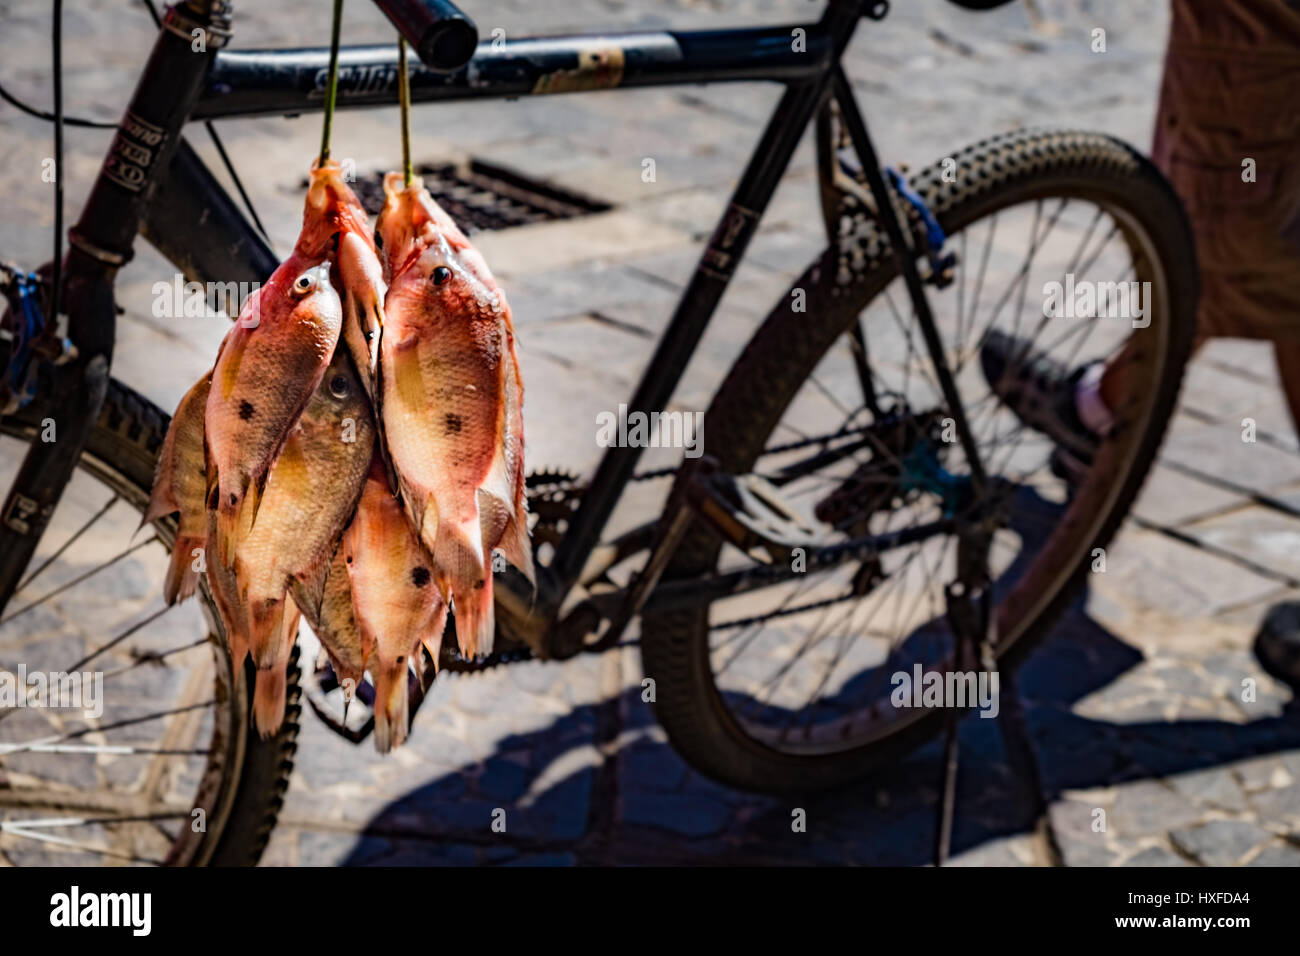 A local fisherman delivering fresh caught fish from Lake Nicaragua, on streets of Granada, Nicaragua Stock Photo